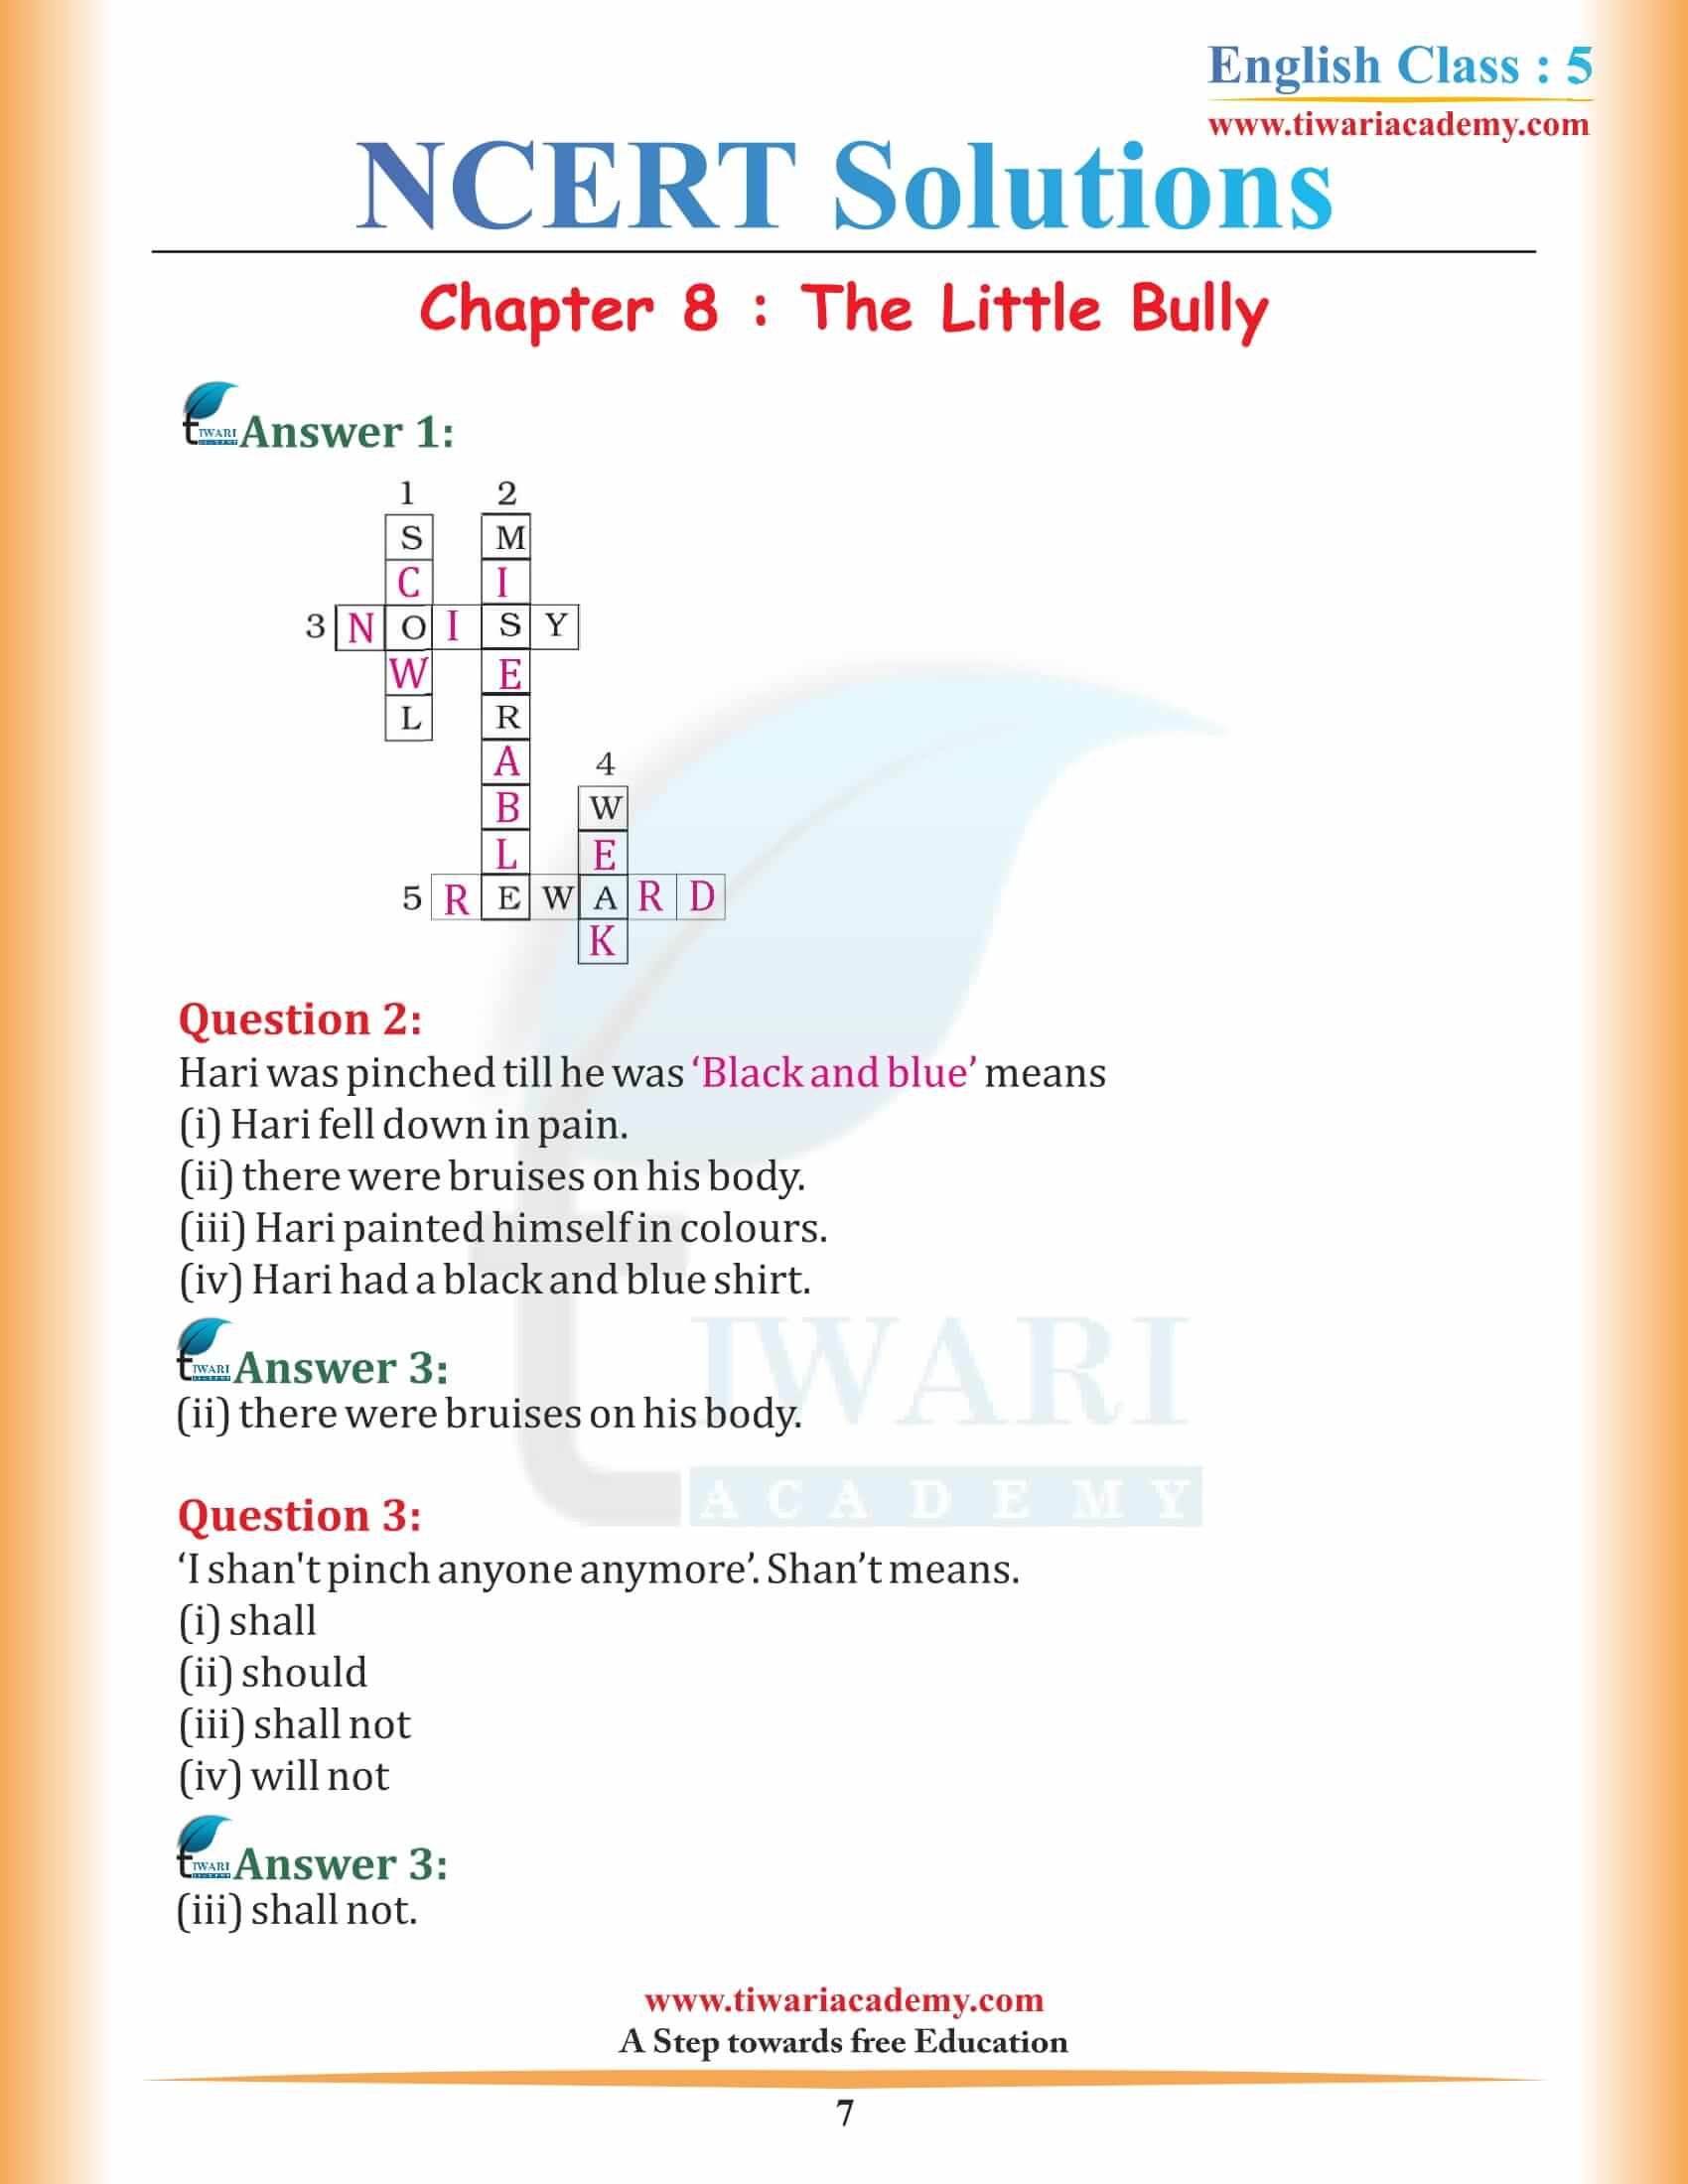 NCERT Solutions for Class 5 English Chapter 8 The Little Bully in Hindi